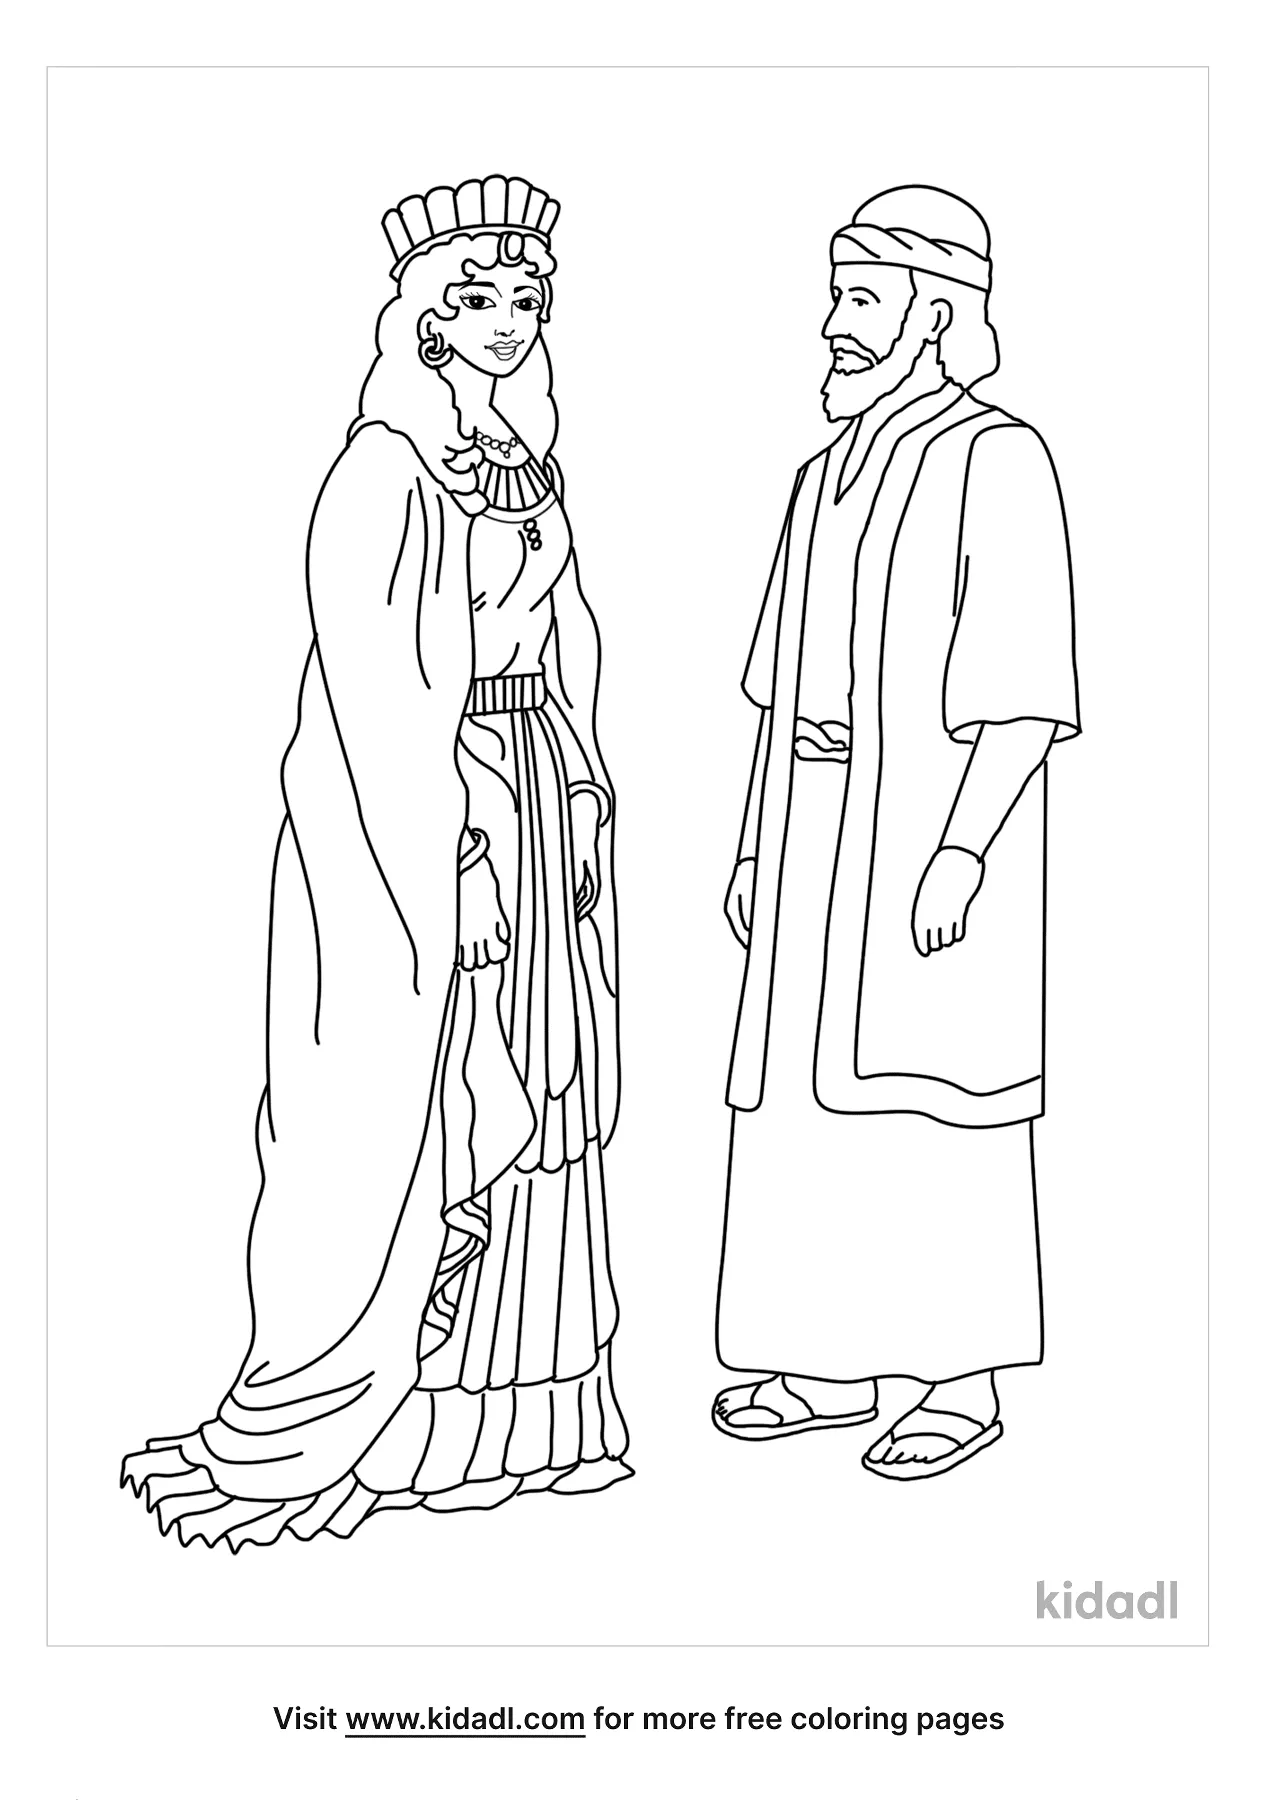 Queen Esther And Mordecai Coloring Page